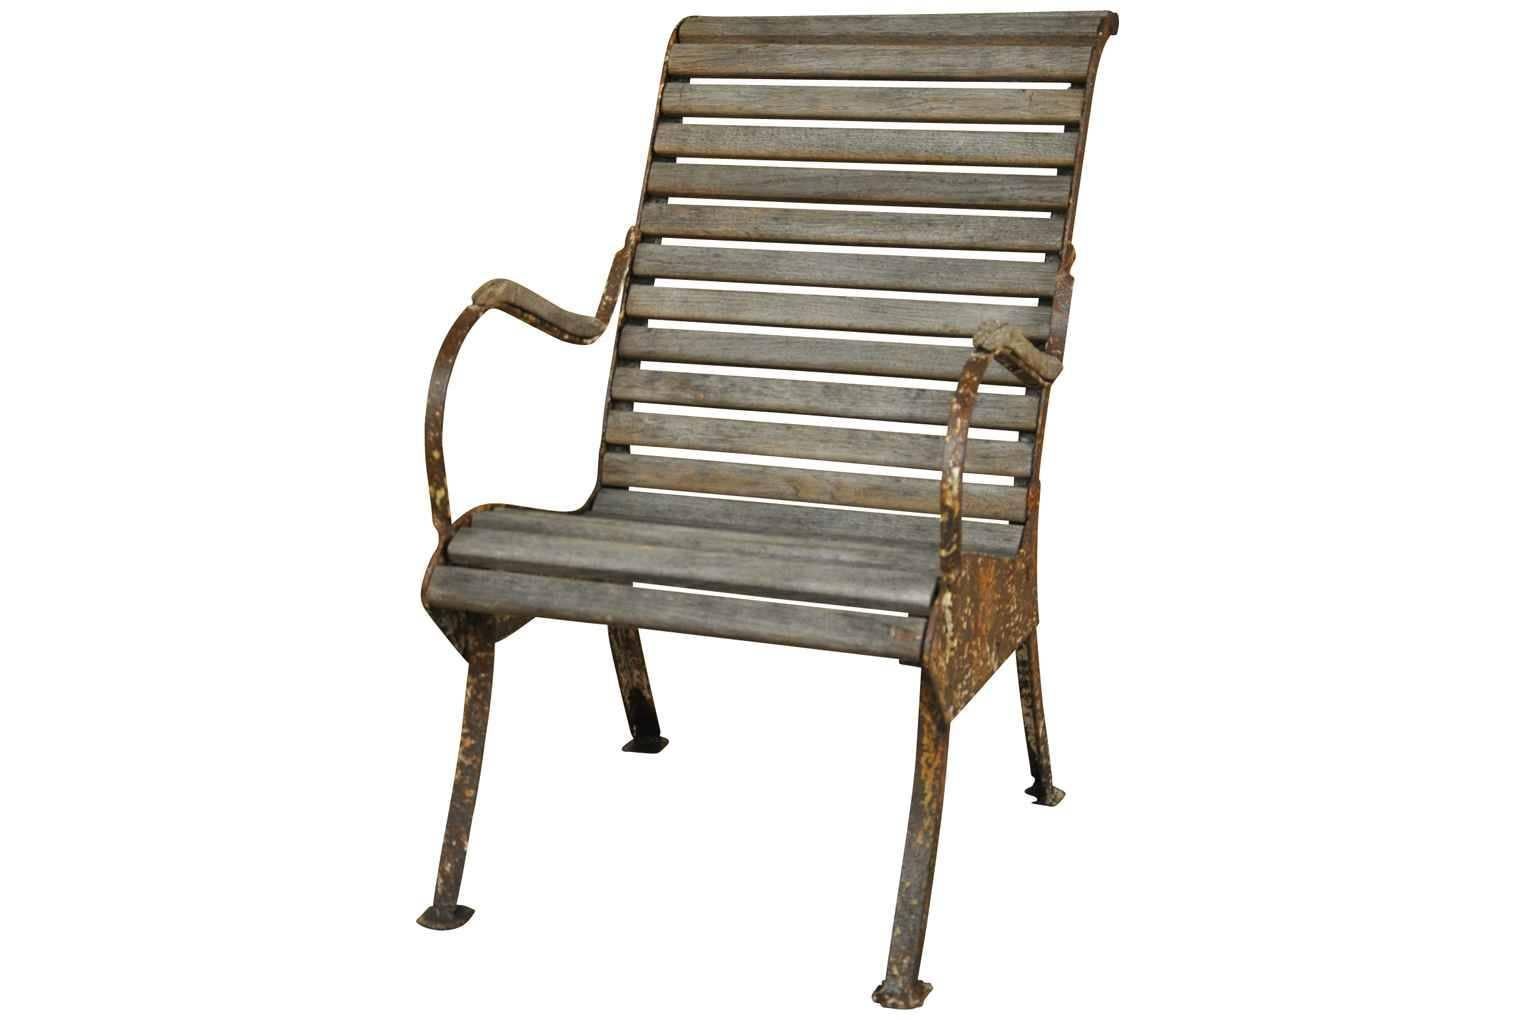 A terrific 19th century garden chair from France. Wonderfully constructed in iron and oak. Fabulous patina. Very sturdy and very comfortable.